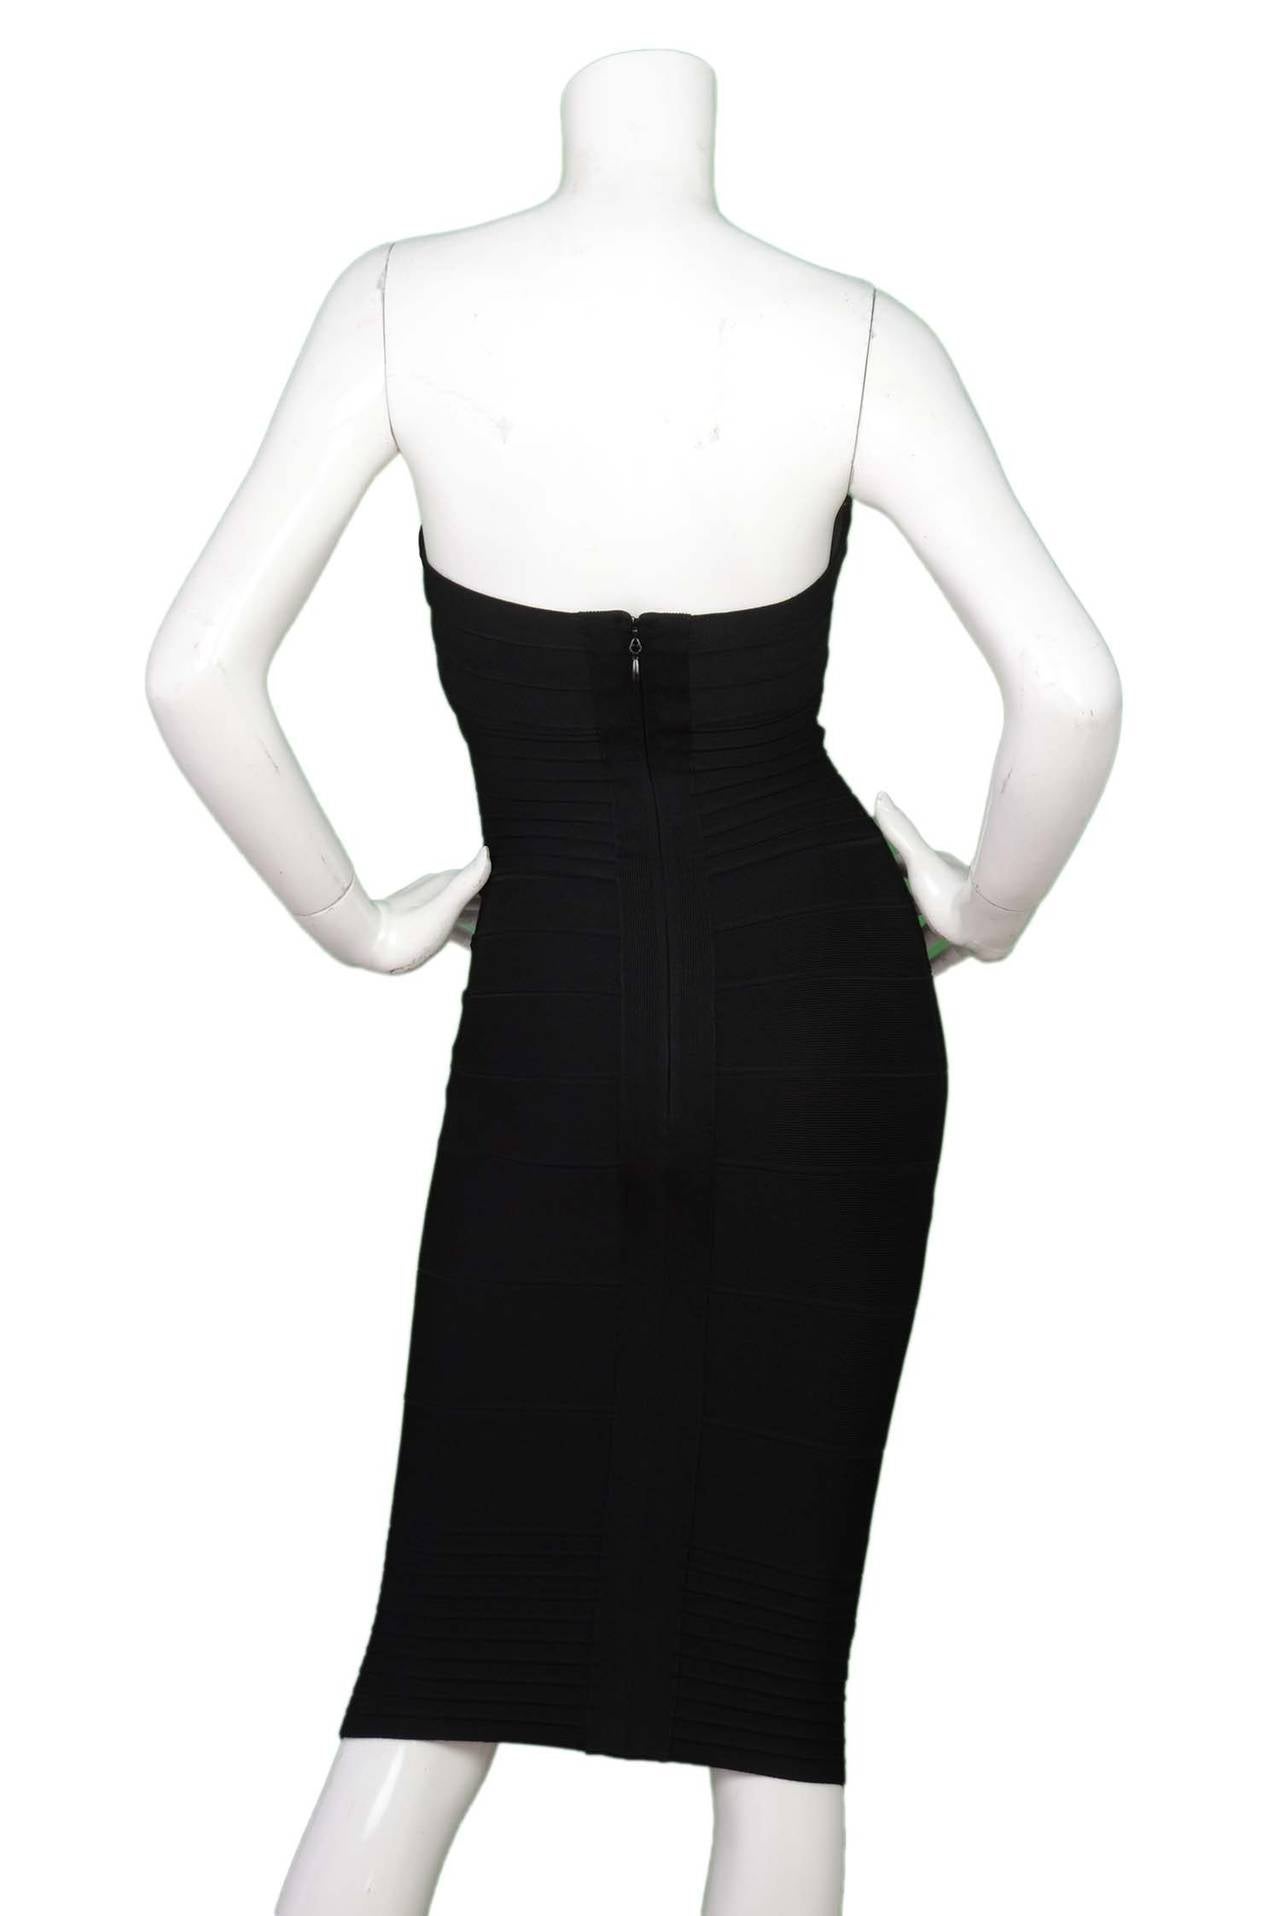 HERVE LEGER Black Strapless Bandage Dress sz XS In Excellent Condition In New York, NY